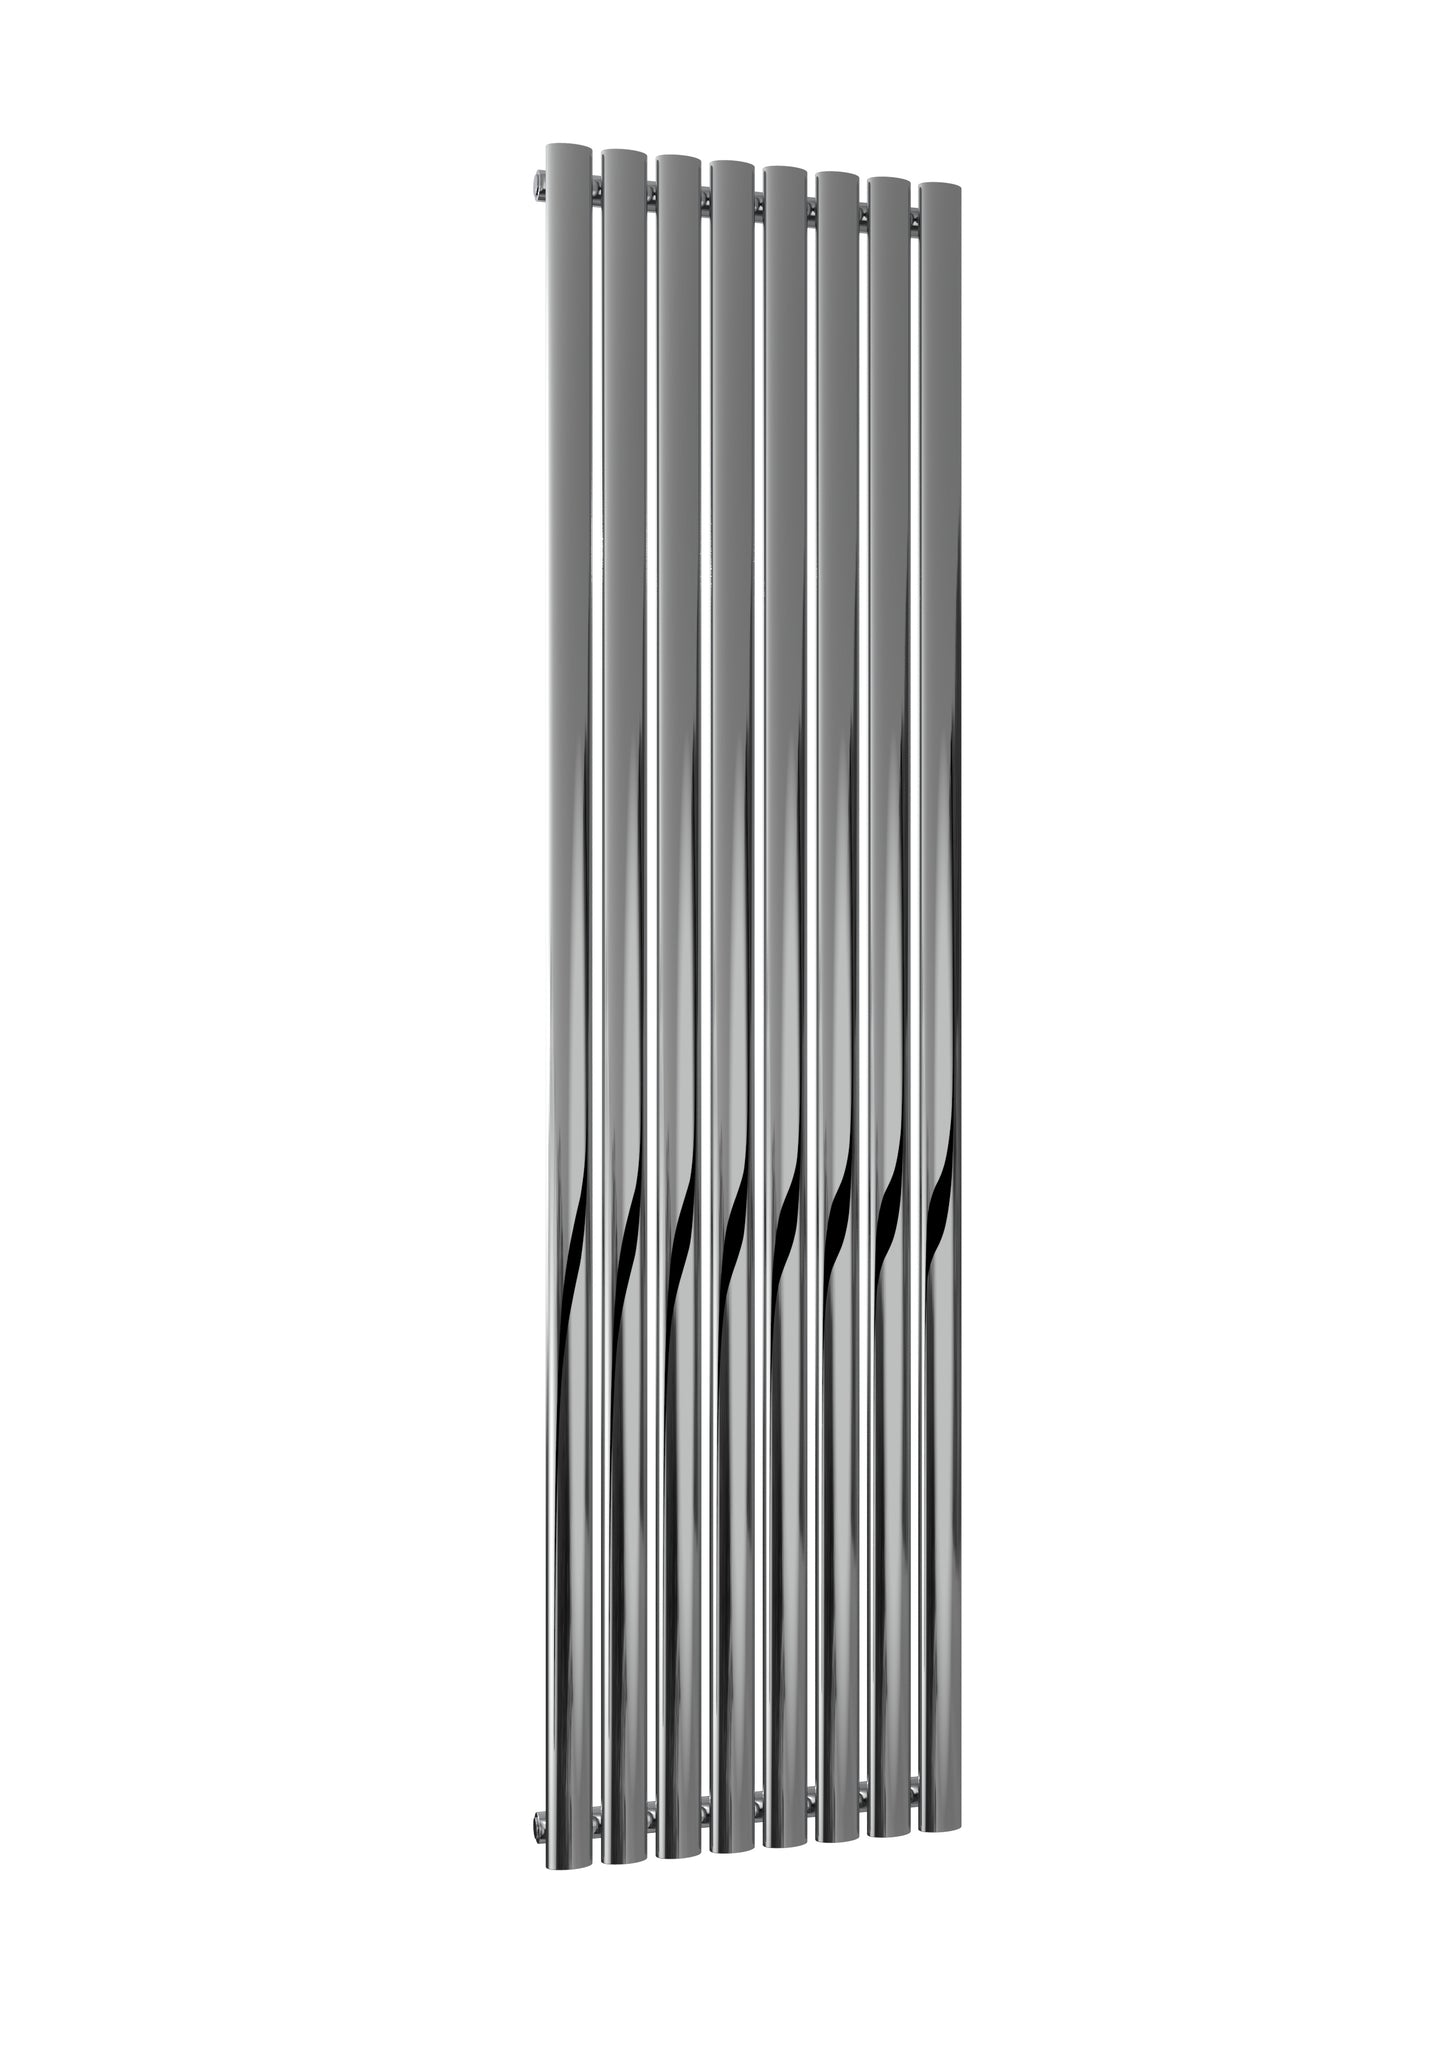 Nerox Vertical Single Radiator - 1800mm Tall - Polished Stainless Steel - Various Sizes